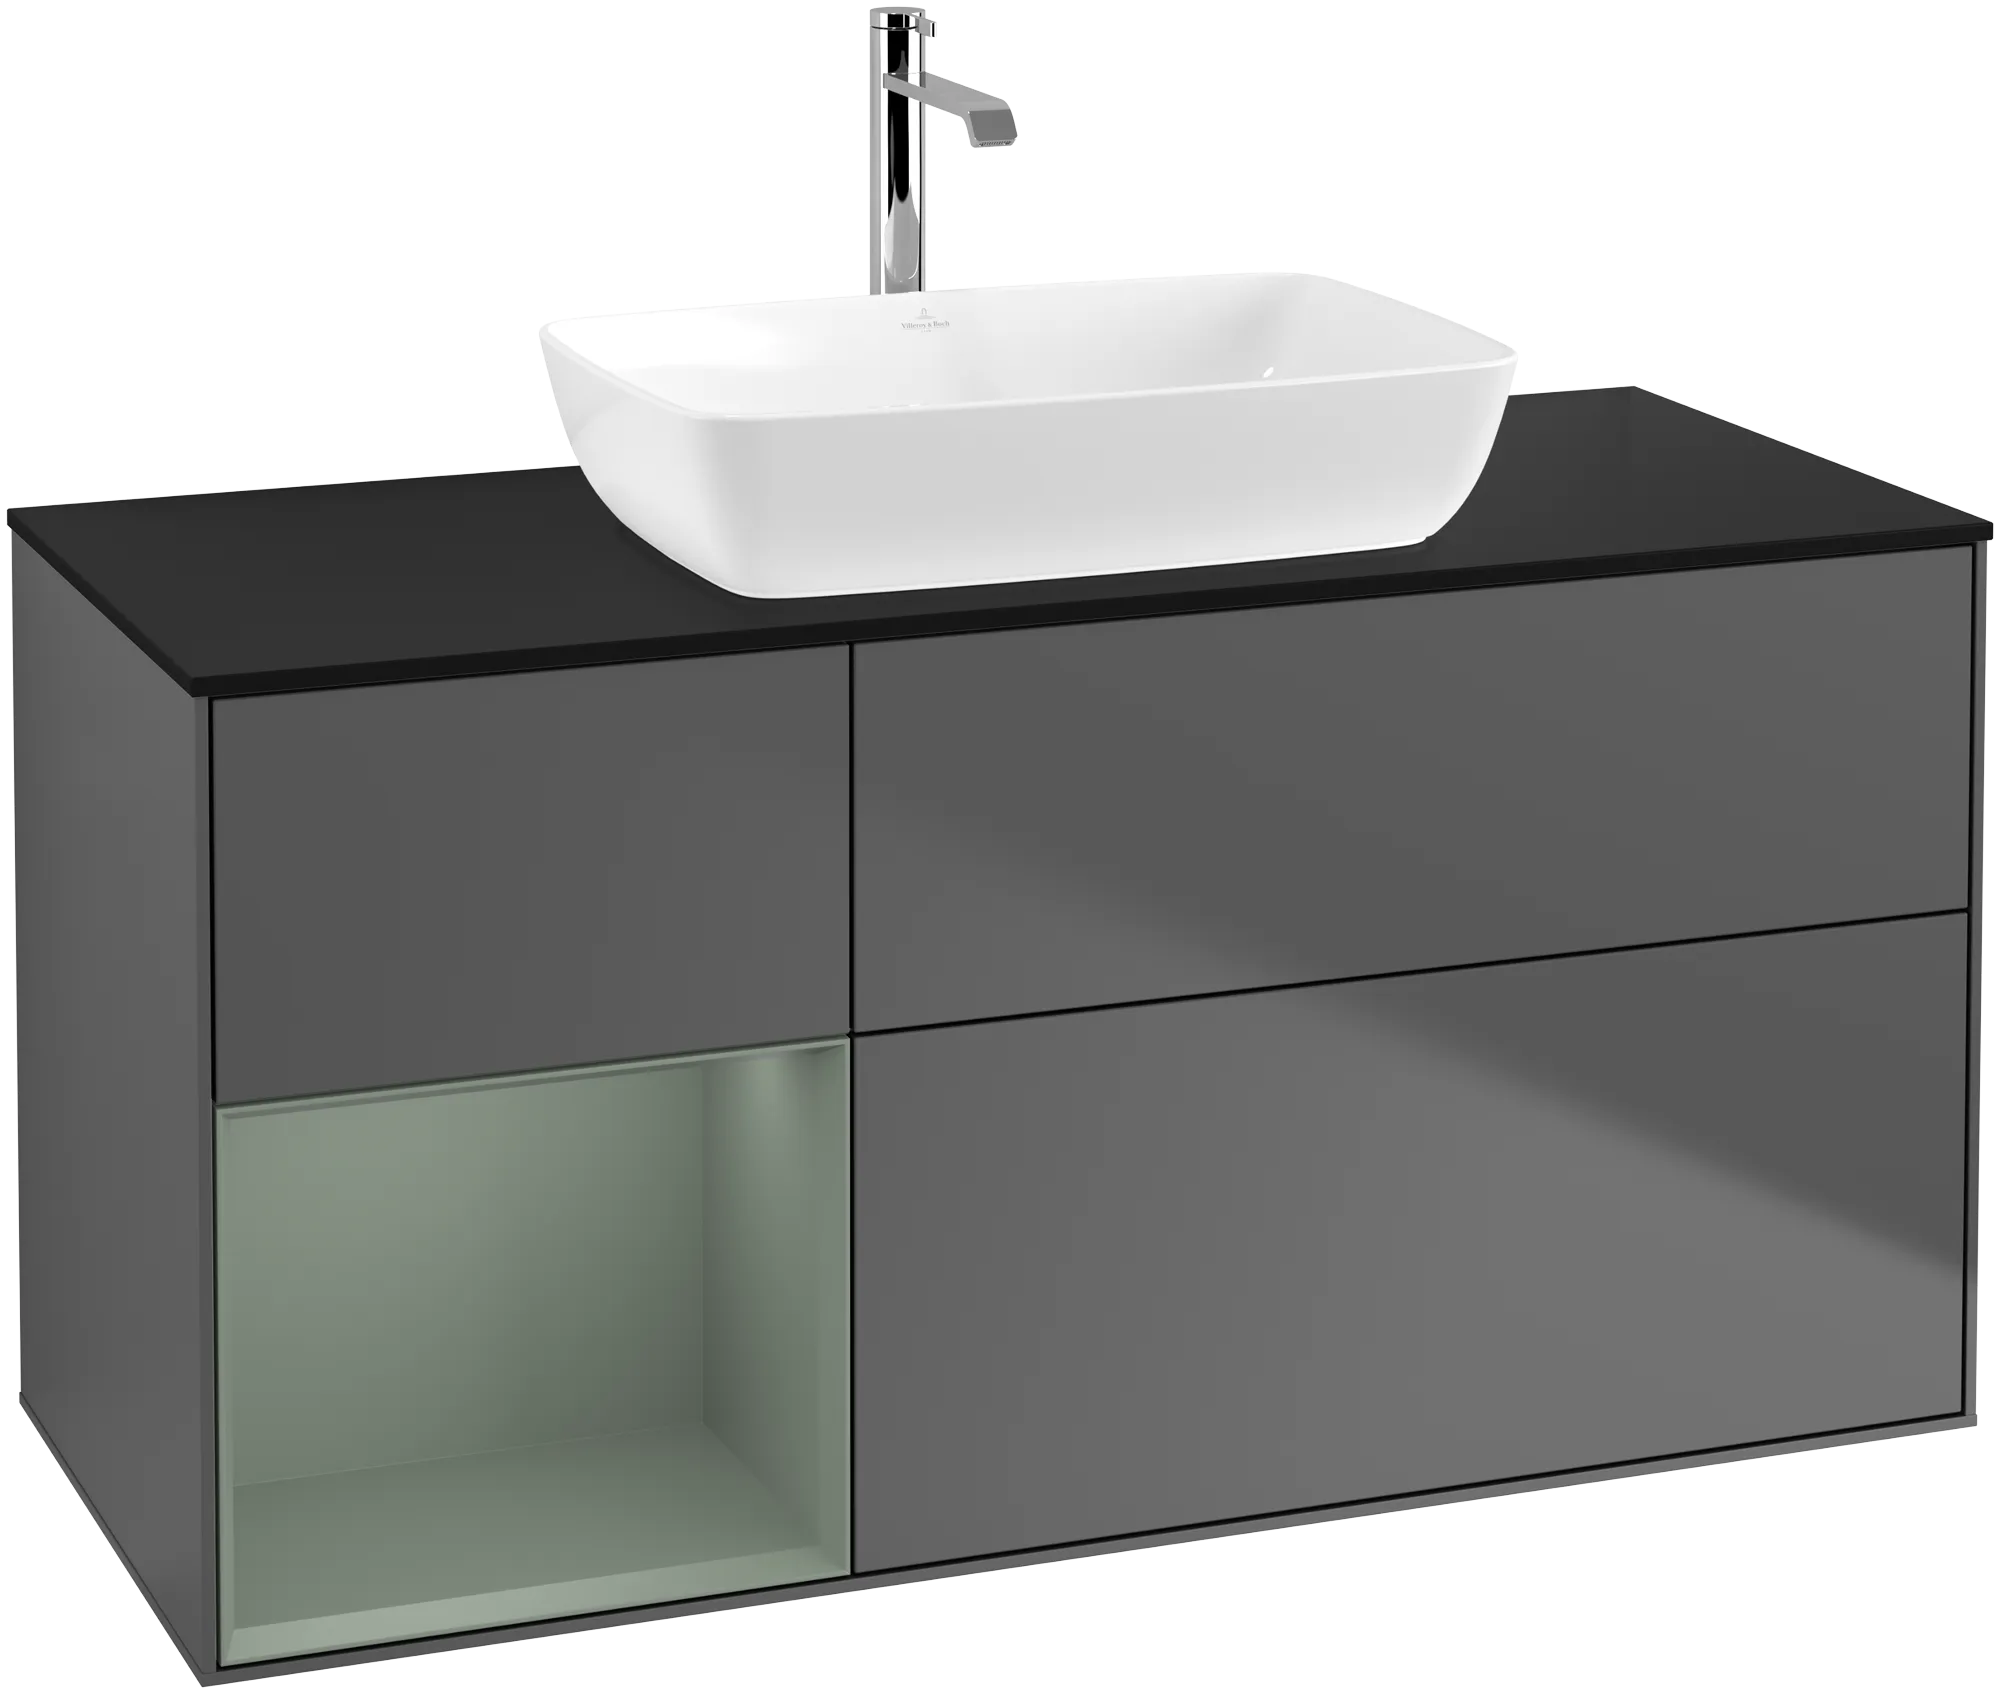 VILLEROY BOCH Finion Vanity unit, with lighting, 3 pull-out compartments, 1200 x 603 x 501 mm, Anthracite Matt Lacquer / Olive Matt Lacquer / Glass Black Matt #G822GMGK resmi